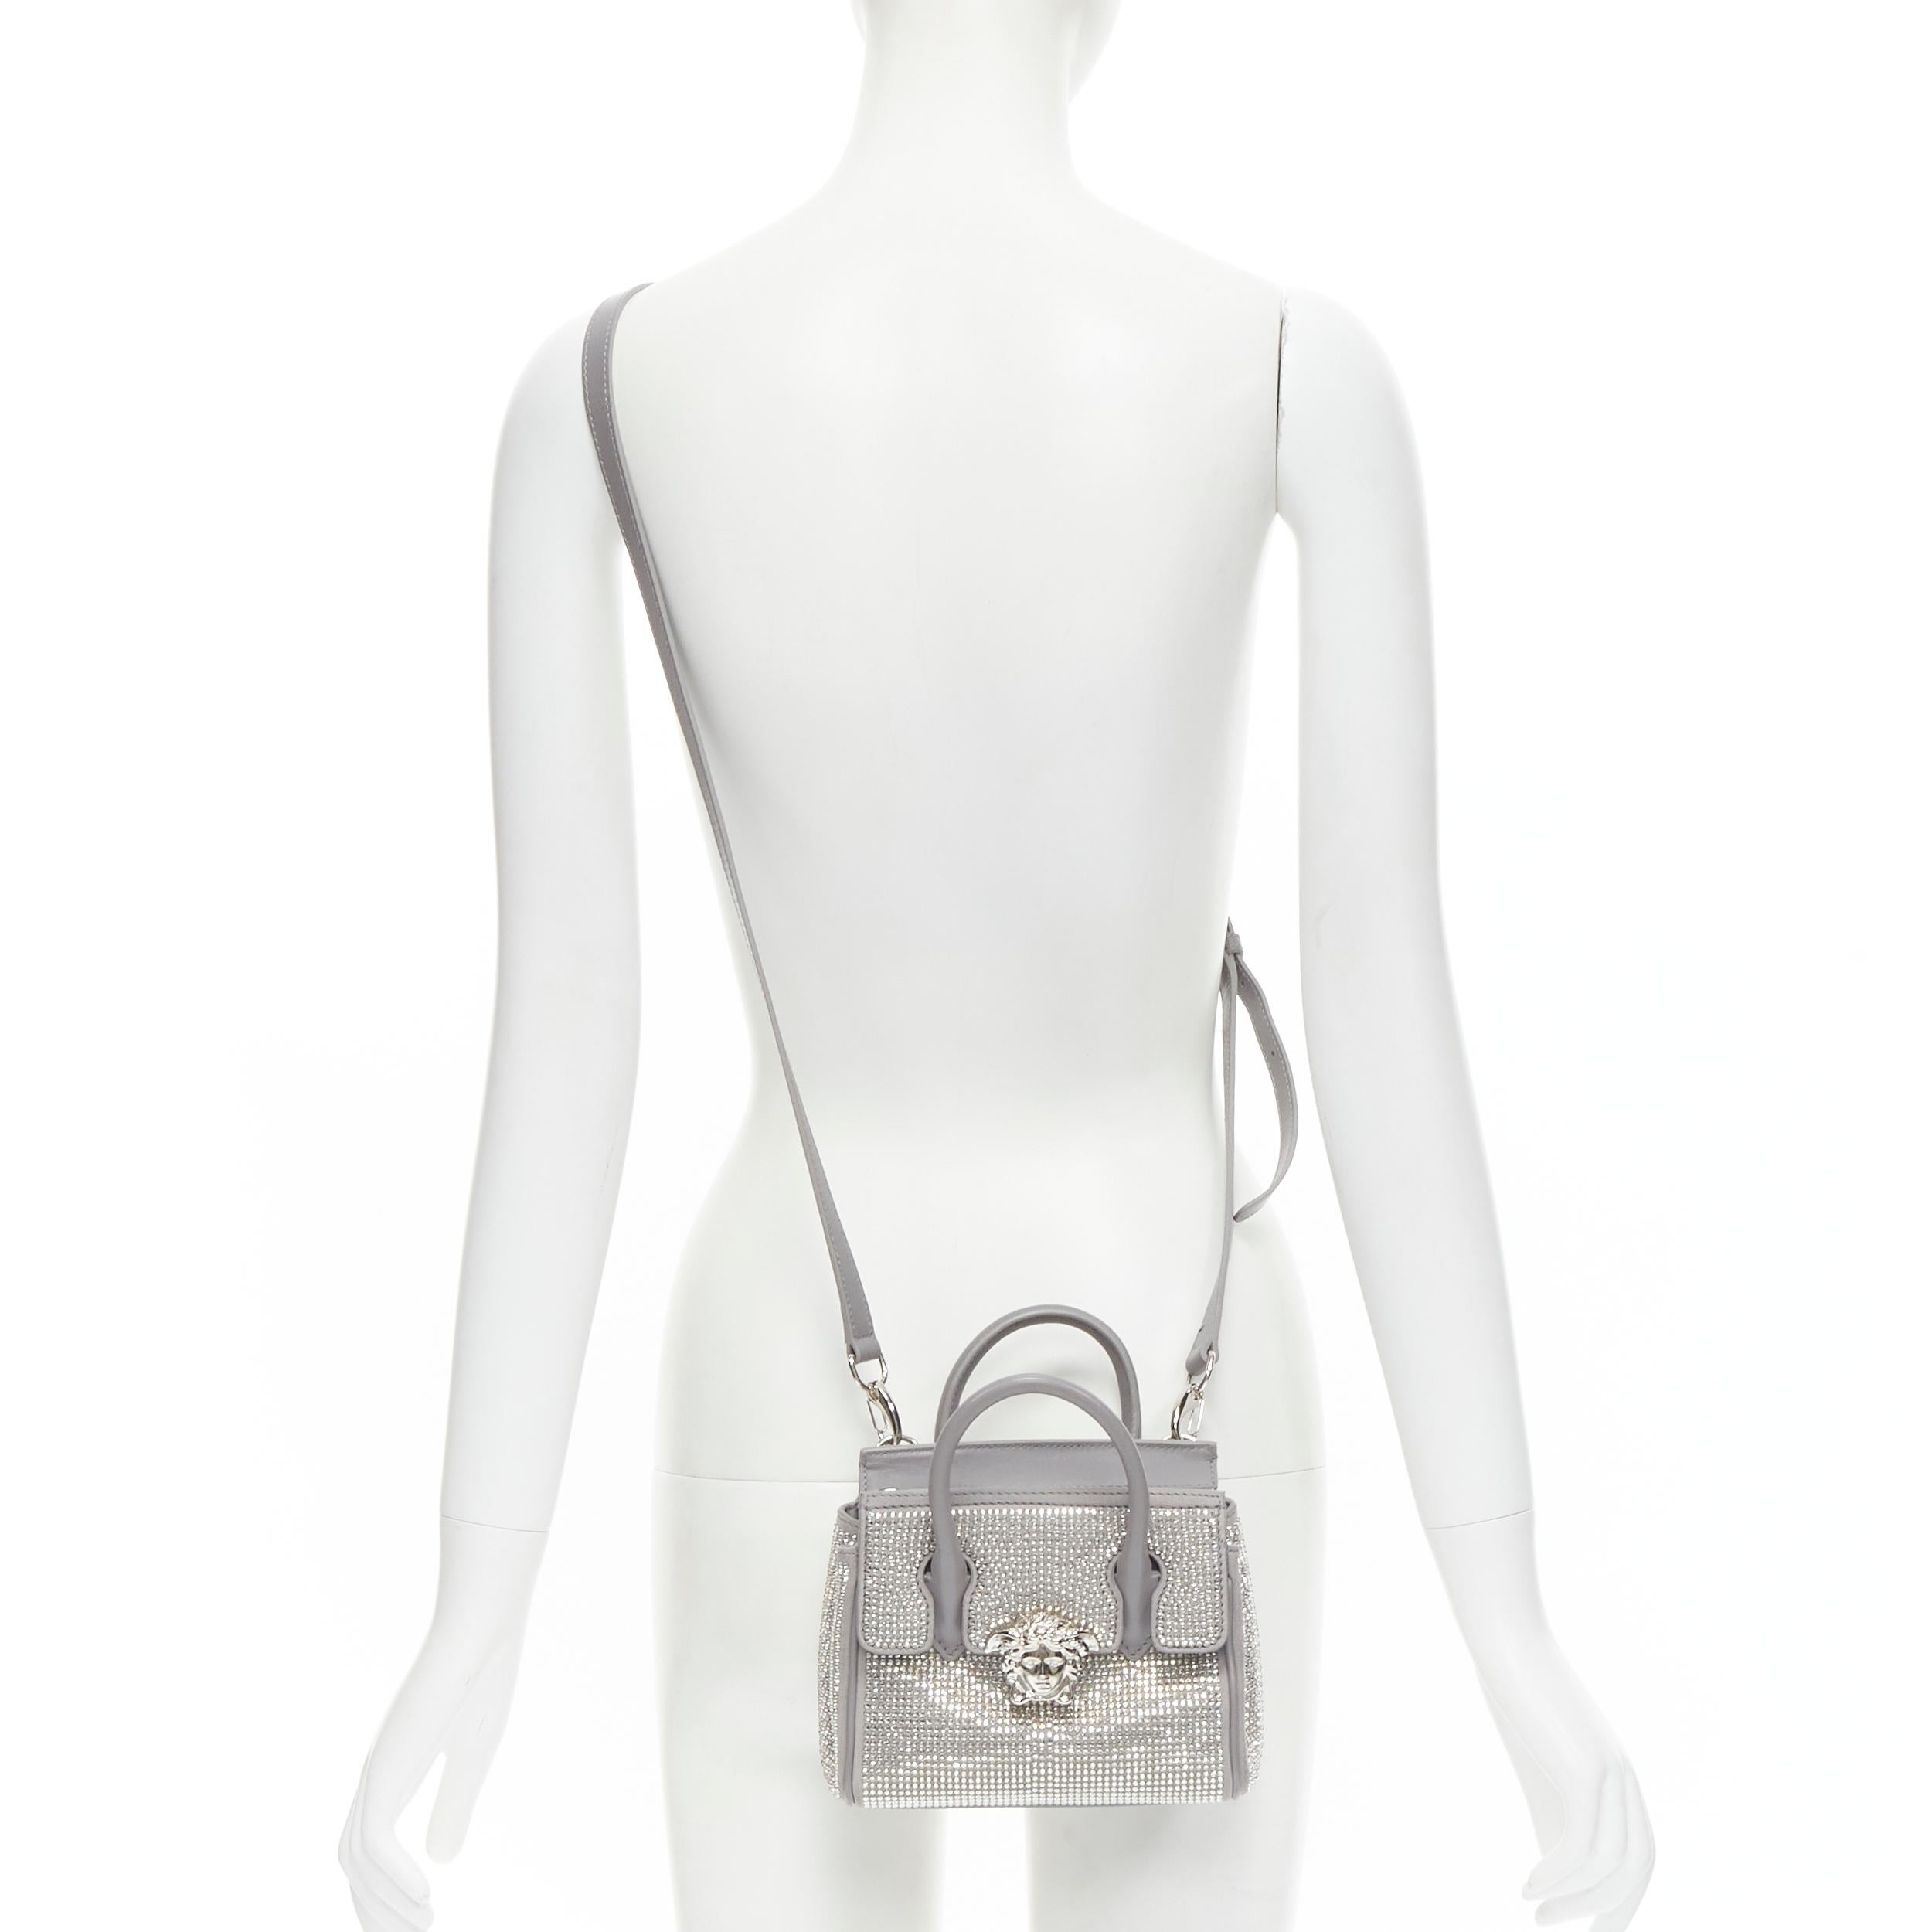 new VERSACE Palazzo Empire Mini Limited Edition grey crystal crossbody bag 
Reference: TGAS/B02062 
Brand: Versace 
Designer: Donatella Versace 
Model: Empire Mini 
Material: Leather 
Color: Grey 
Pattern: Solid 
Closure: Zip 
Extra Detail: This